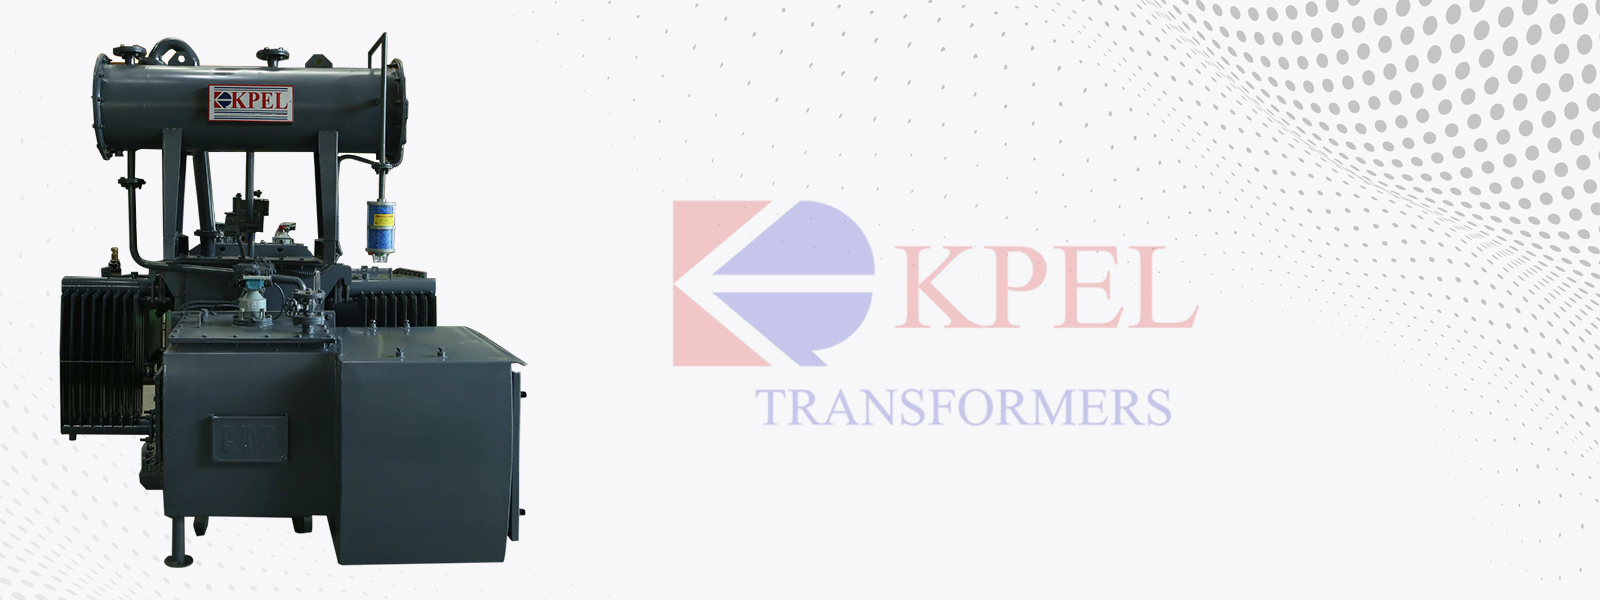 Top Power Transformers Manufacturing Company in India